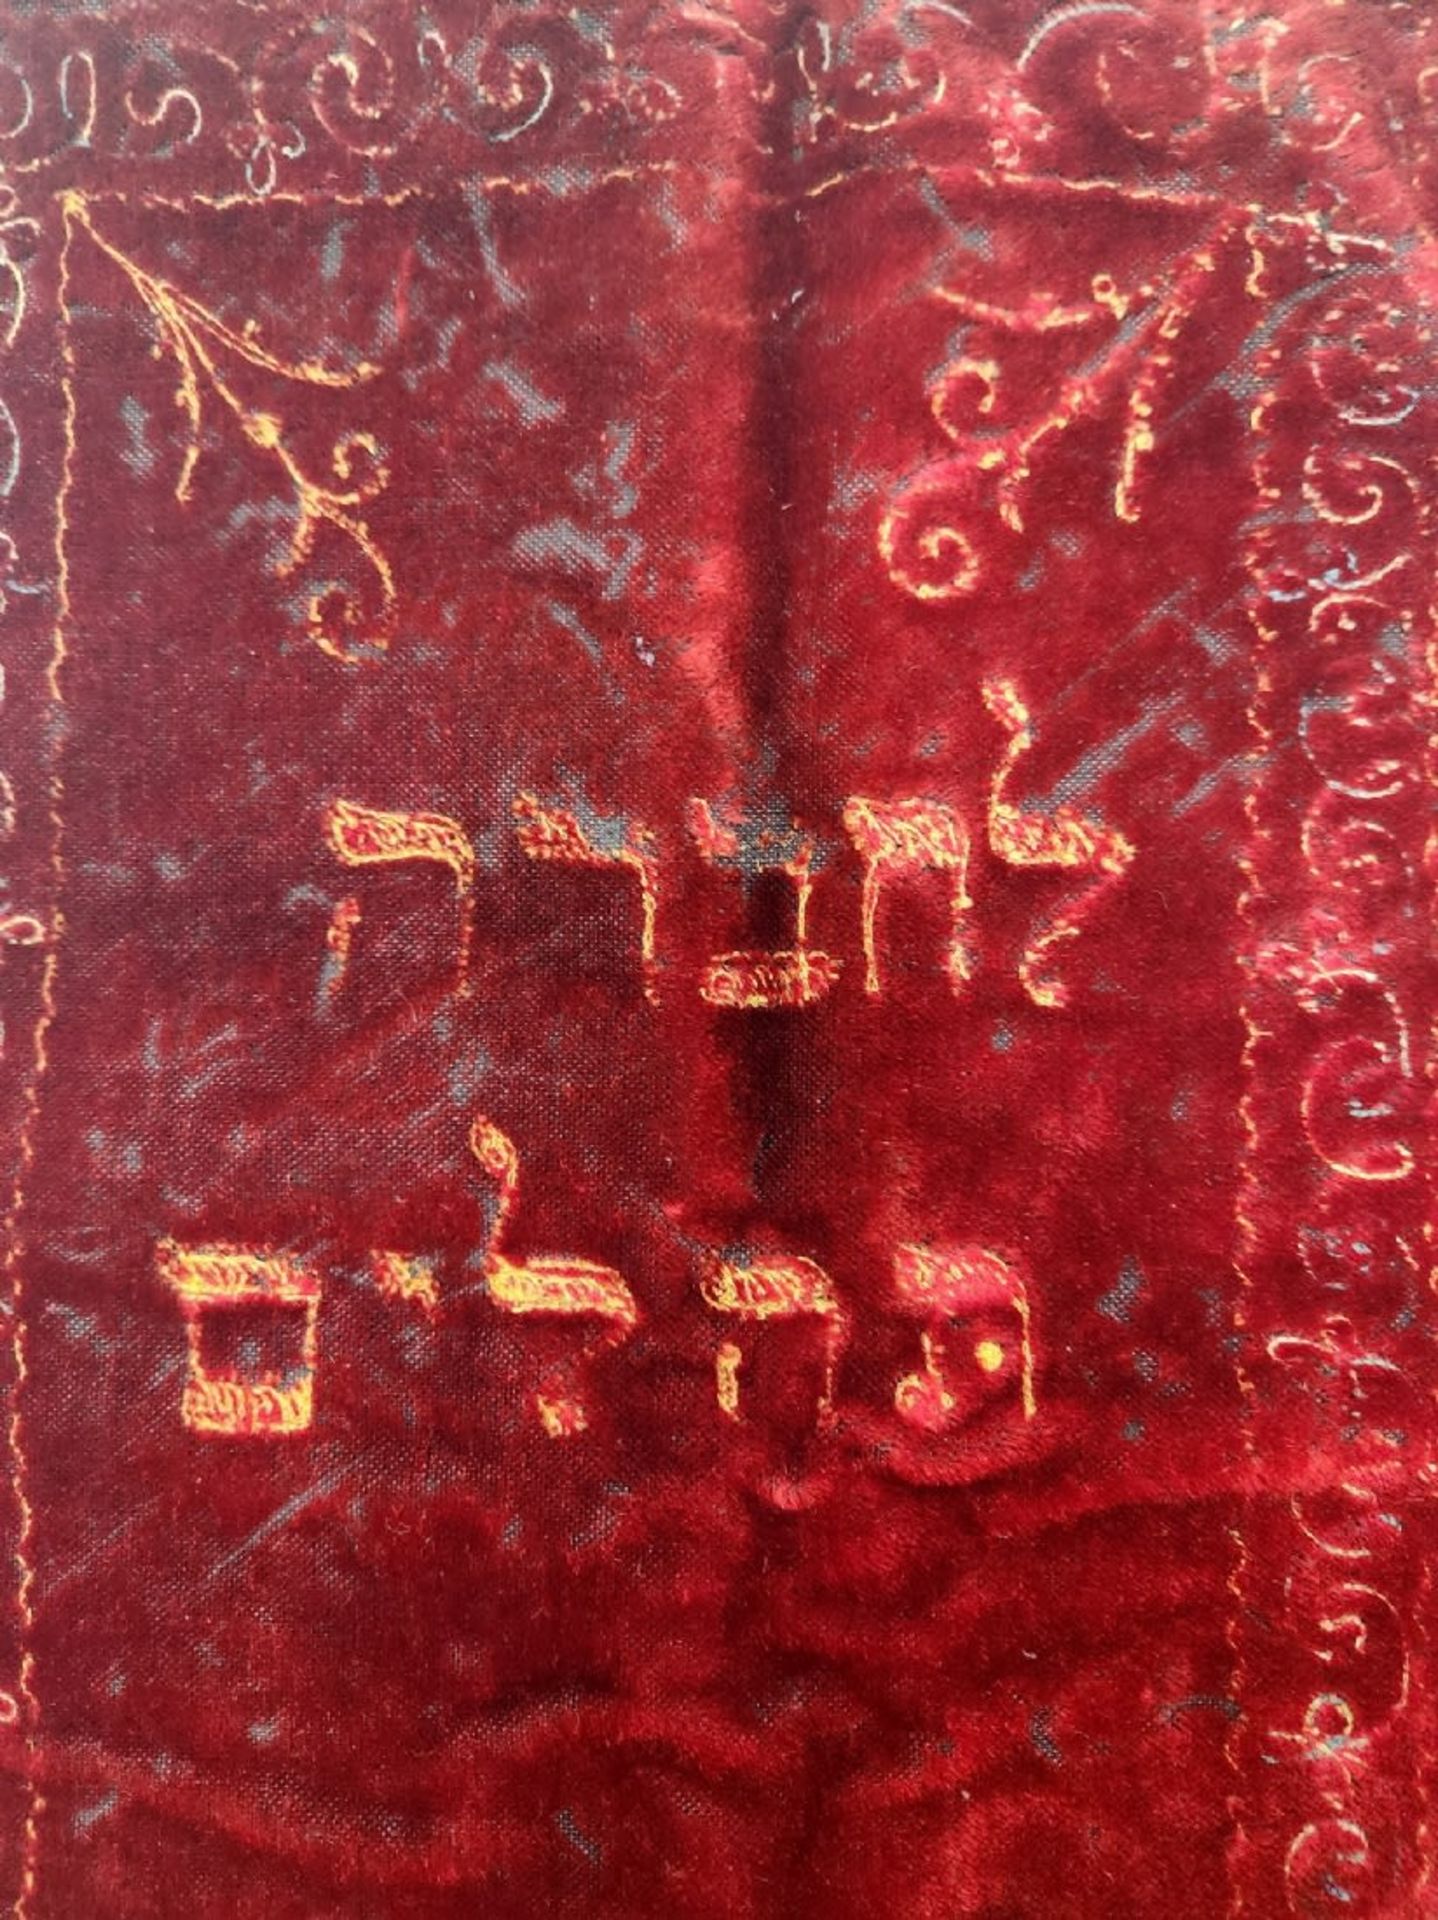 A Torah scroll coat, embroidered with cotton threads on red velvet, dating from 1929, the subject of - Image 3 of 4